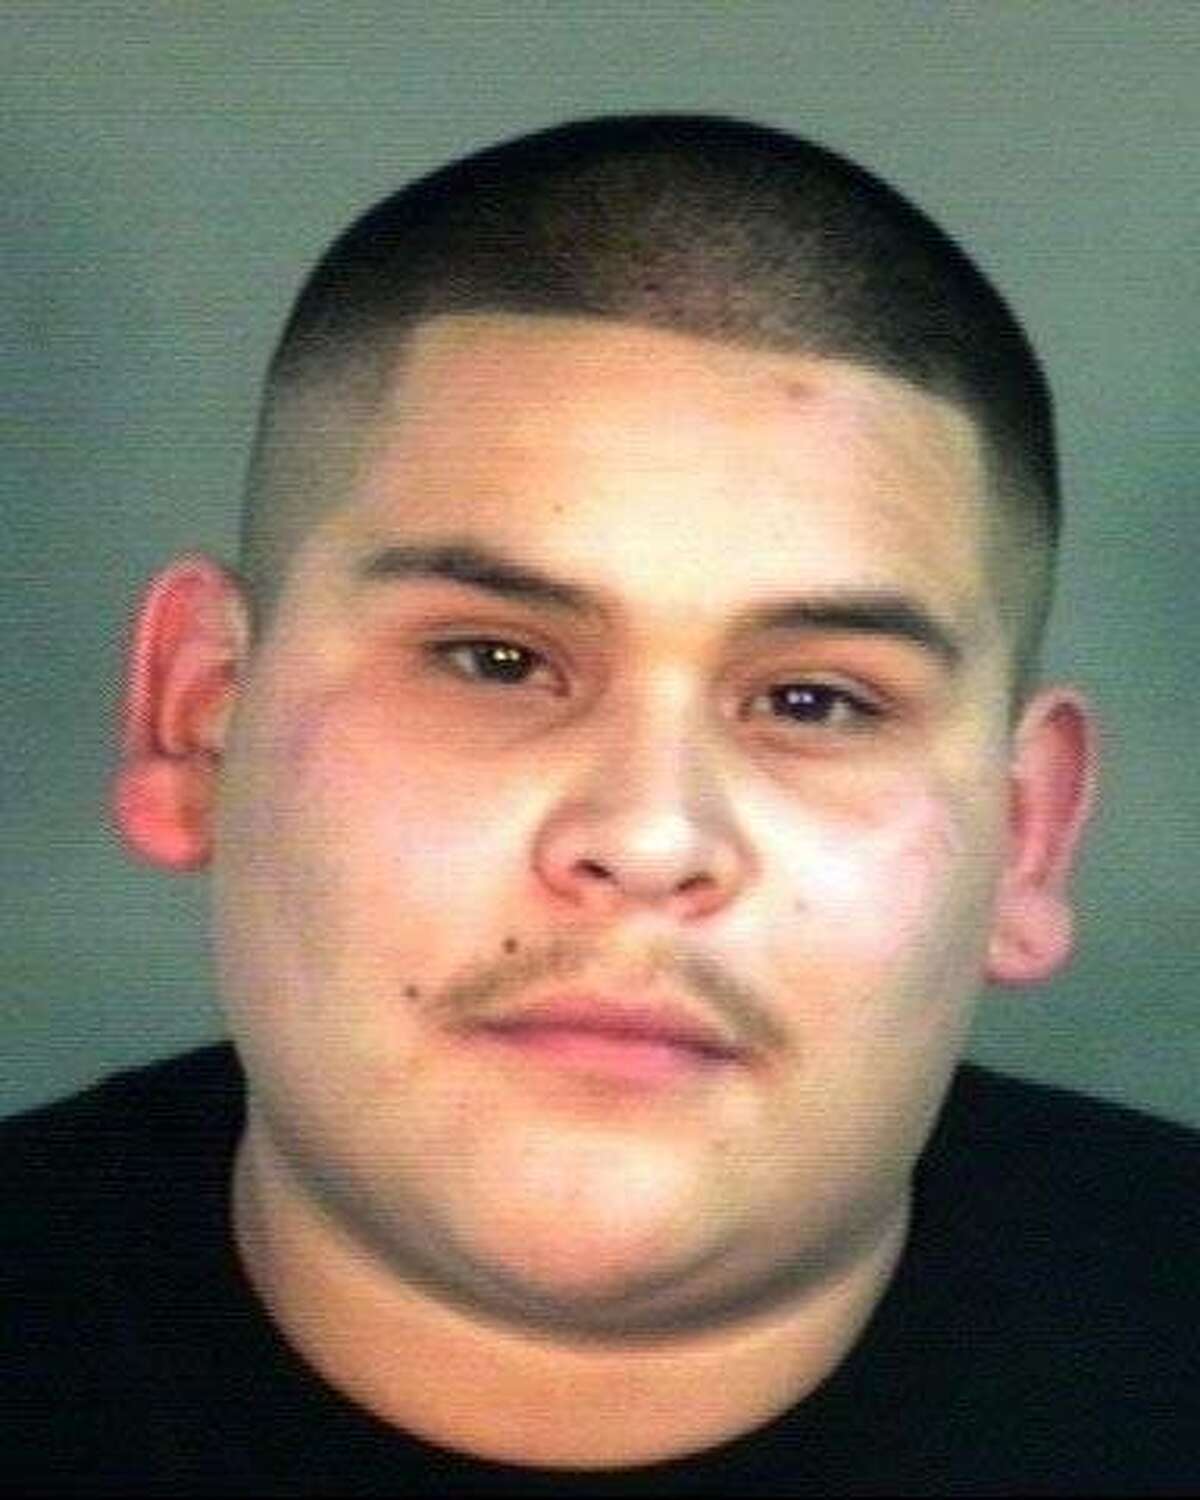 Oakland Police released a mug shot of suspect Andrew Barrientos, who alledgedly shot a Fremont Police office on Friday August 27, 2010, as the officer attempted to serve a warrant off Bancroft Blvd. in East Oakland, Calif. Suspect description-Andrew Barrientos dob- 5-11-90, 5' 7'' 240 pounds,"Decoto" tattooed on the back of the neck "Decoto Ganster" tatooed on his forearms. Ran on: 08-28-2010 Police are looking for Andrew Barrientos, 20, described as 5 feet 7 and 240 pounds. Ran on: 08-28-2010 Police are looking for Andrew Barrientos, 20, described as 5-foot-7 and 240 pounds. Ran on: 08-29-2010 Andrew Barrientos, above, was arrested in the shooting of Officer Todd Young, below. Ran on: 08-29-2010 Andrew Barrientos, above, was arrested in the shooting of Officer Todd Young, below. Ran on: 08-29-2010 Andrew Barrientos, above, was arrested in the shooting of Officer Todd Young, below. Ran on: 08-29-2010 Andrew Barrientos, above, was arrested in the shooting of Officer Todd Young, below. Ran on: 08-30-2010 Andrew Barrientos could face charges today in the shooting of Officer Todd Young. Ran on: 08-30-2010 Andrew Barrientos could face charges today in the shooting of Officer Todd Young. Ran on: 08-31-2010 Andrew Barrientos Ran on: 09-01-2010 Andrew Barrientos, top right, is accused of shooting Fremont police Officer Todd Young, below right.